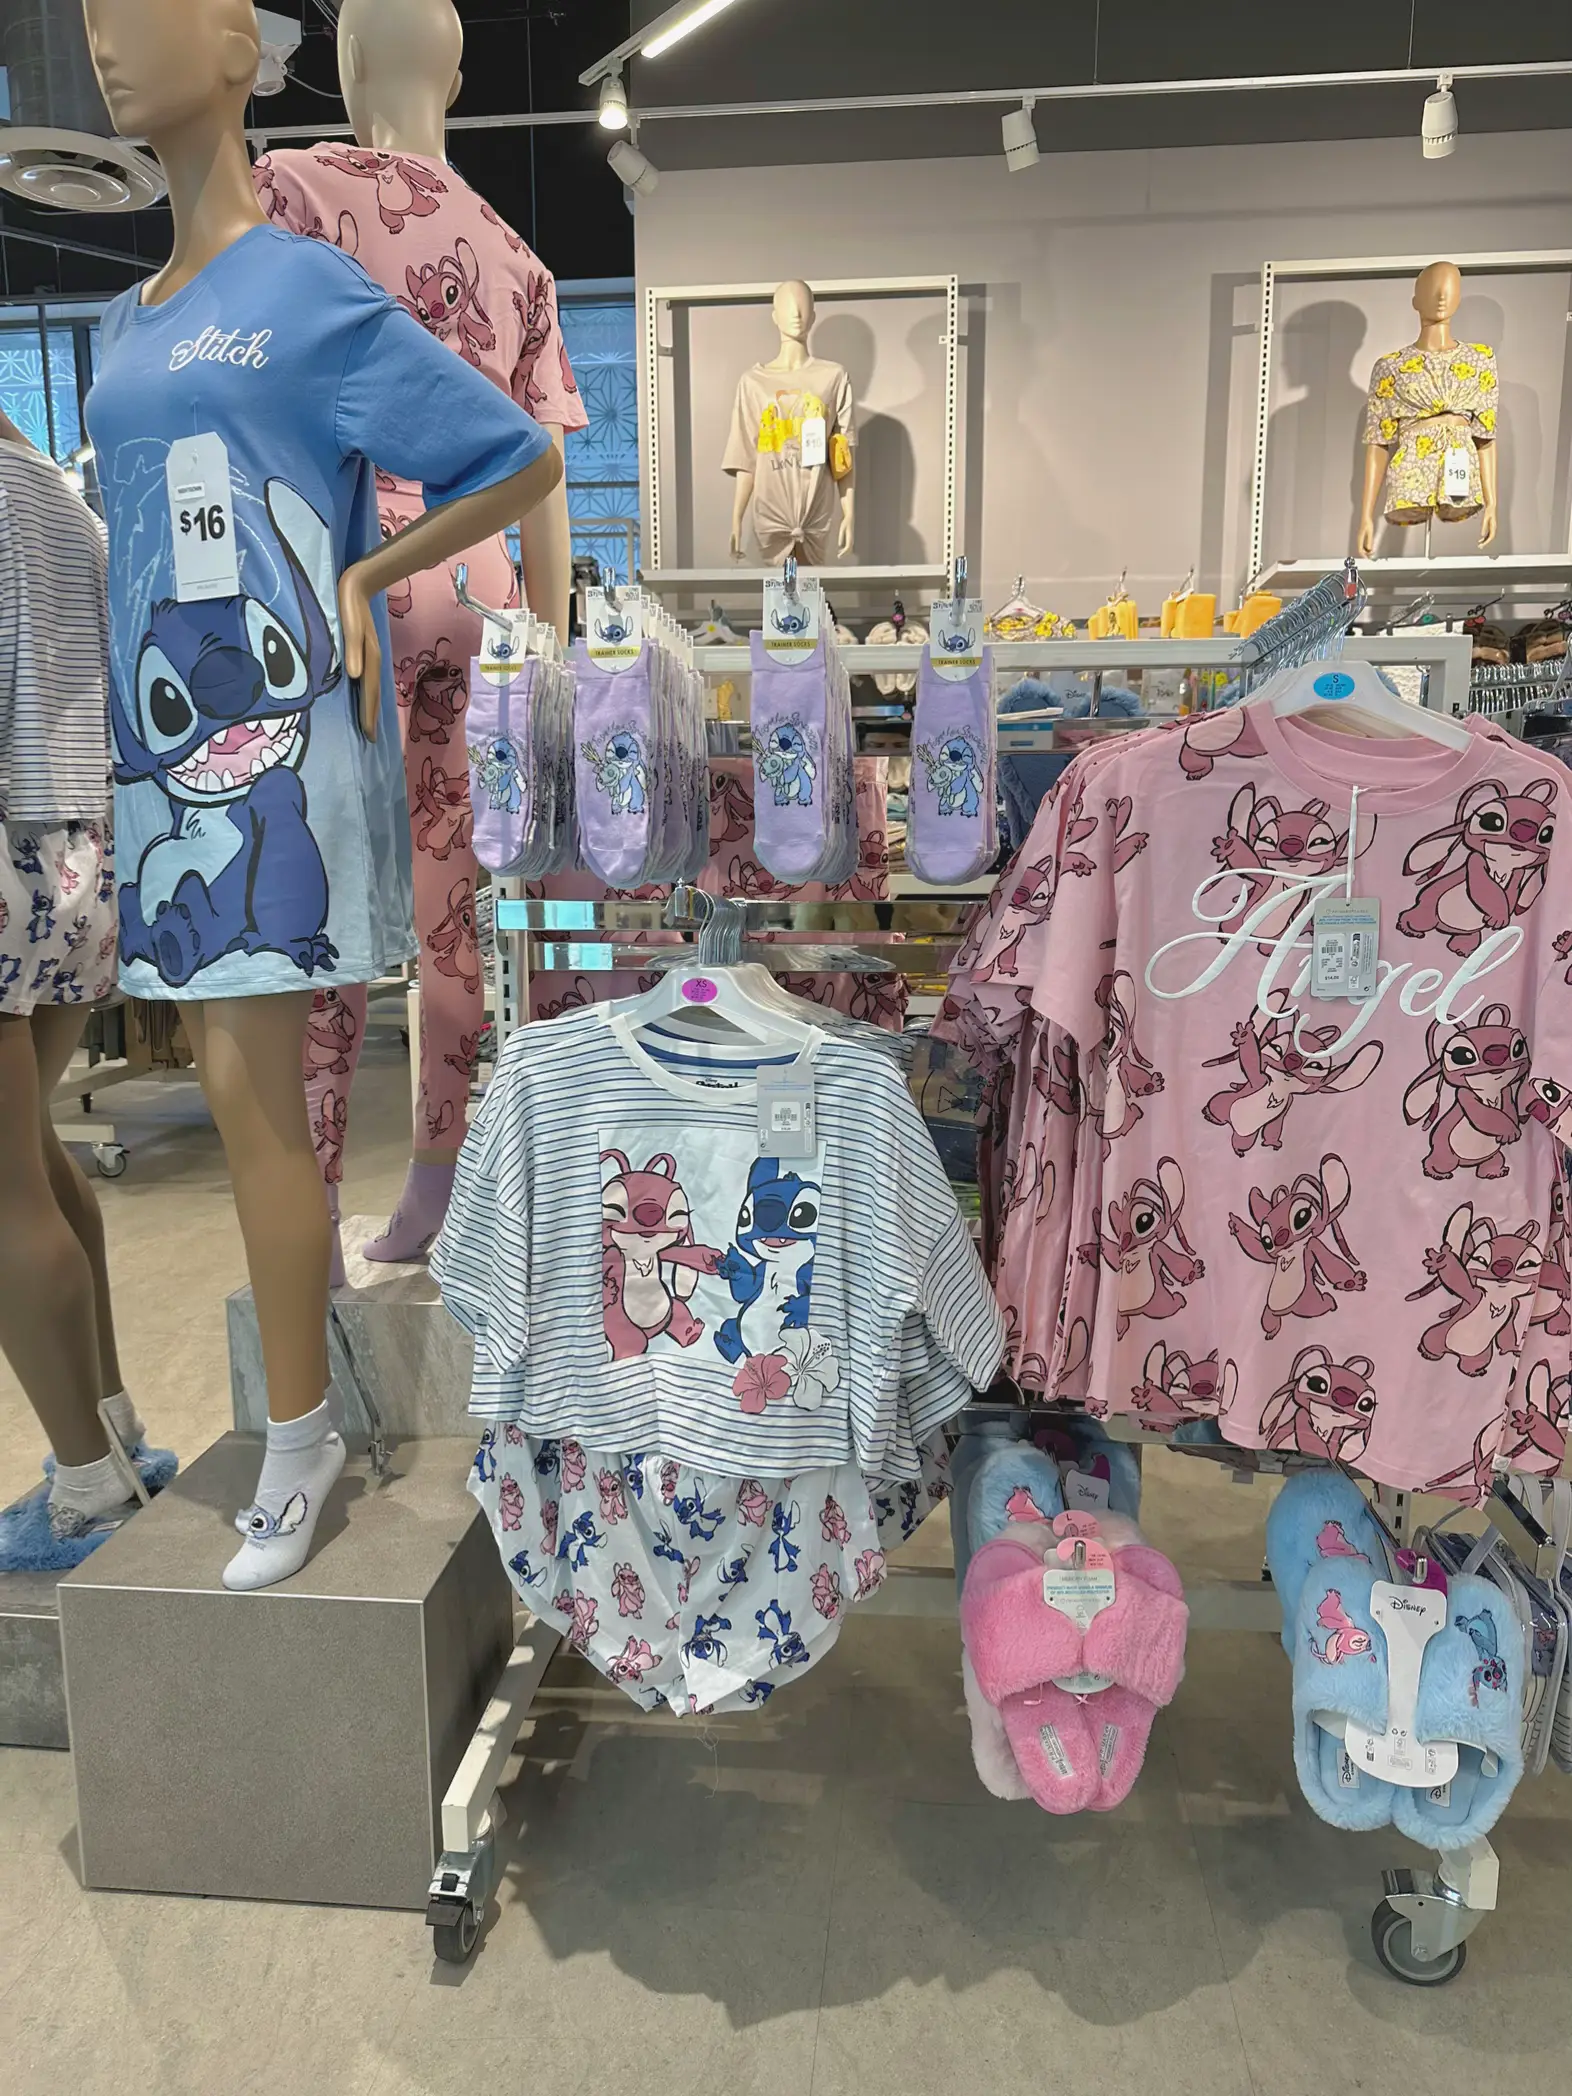 Primark shares cute £6 underwear set but frustrated shoppers make